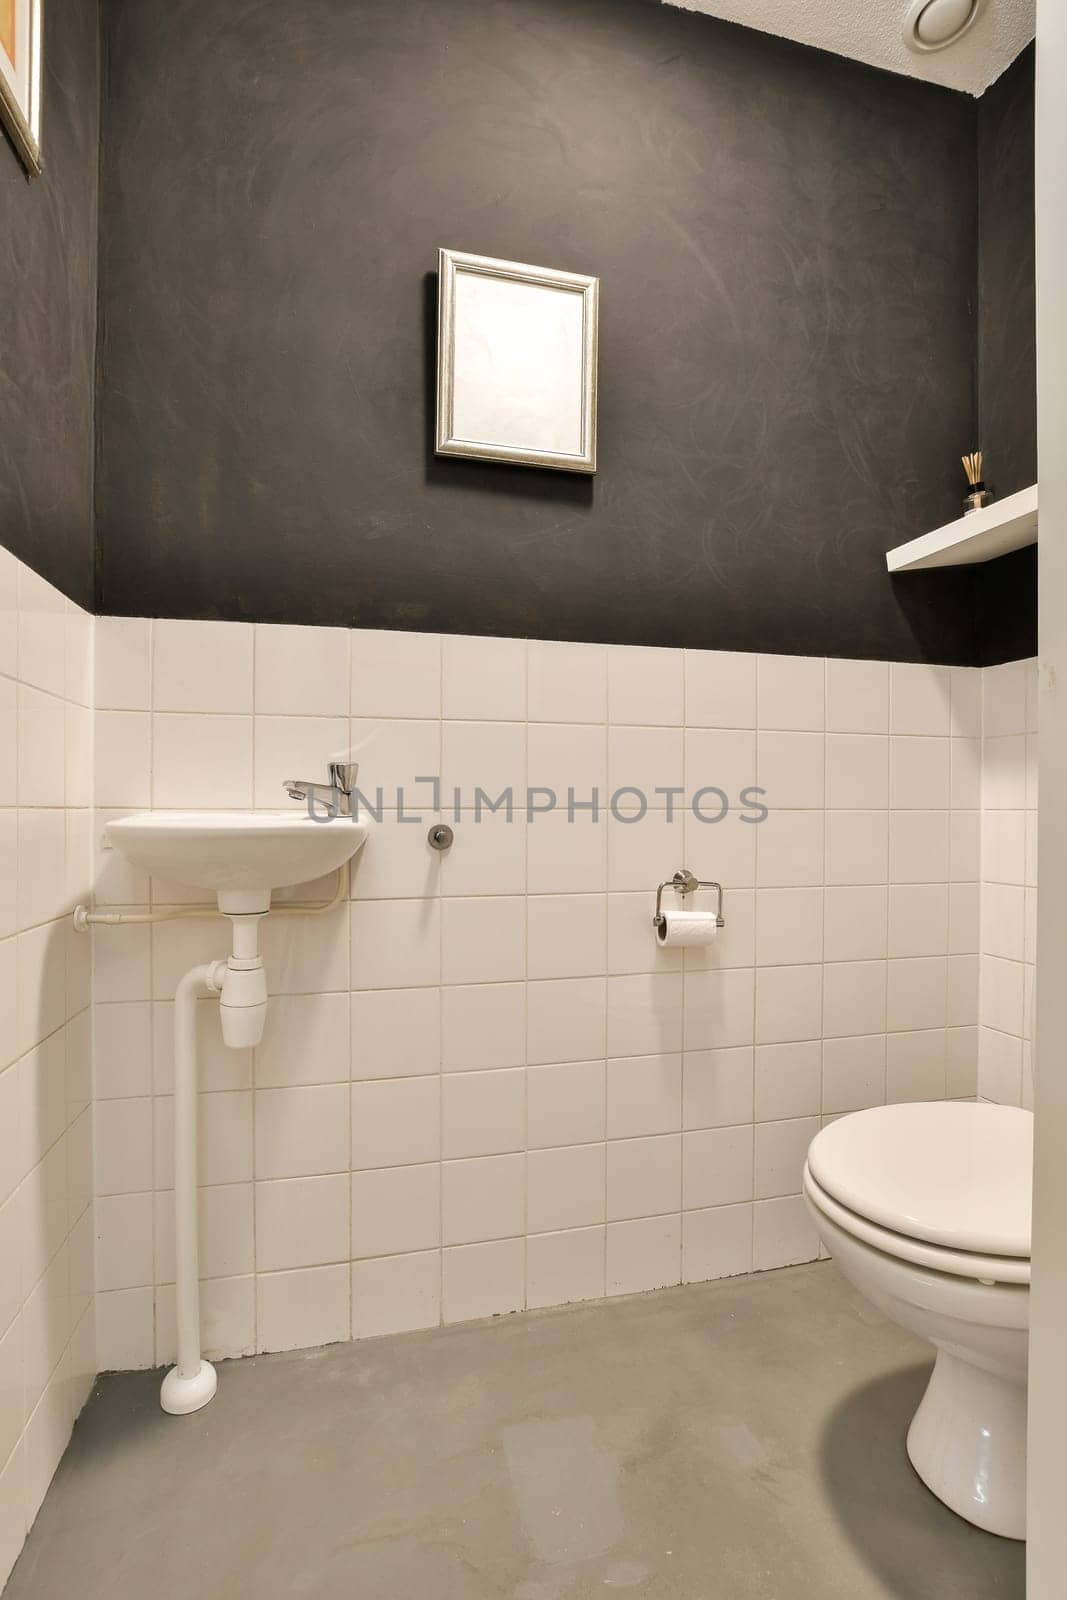 a bathroom with black walls and white tiles on the wall, there is a toilet in the corner next to the sink